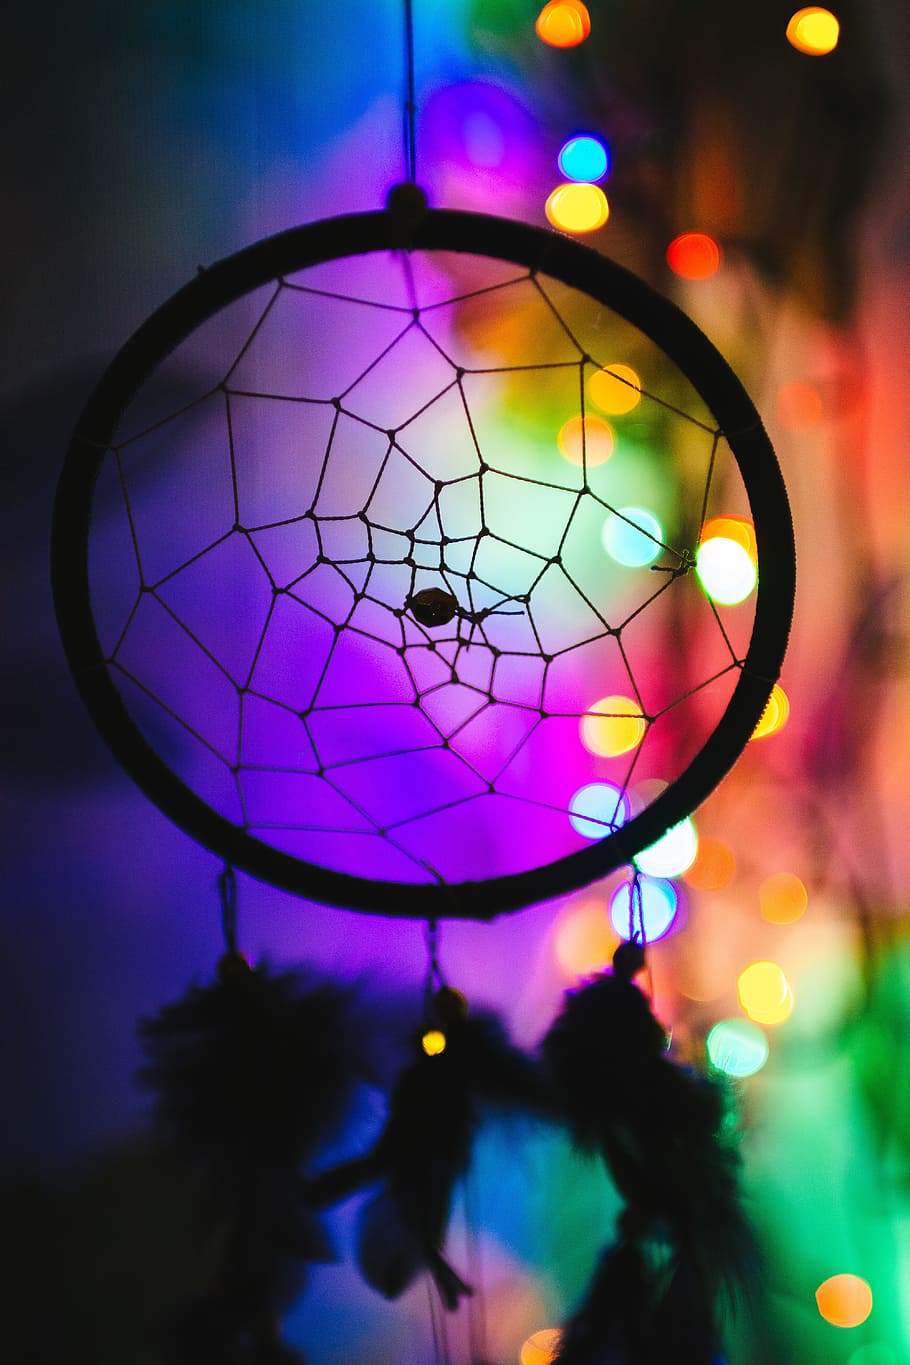 black dream catcher, colorful, colourful, dream catcher, lights, silhouette, illuminated, focus on foreground, multi colored, decoration